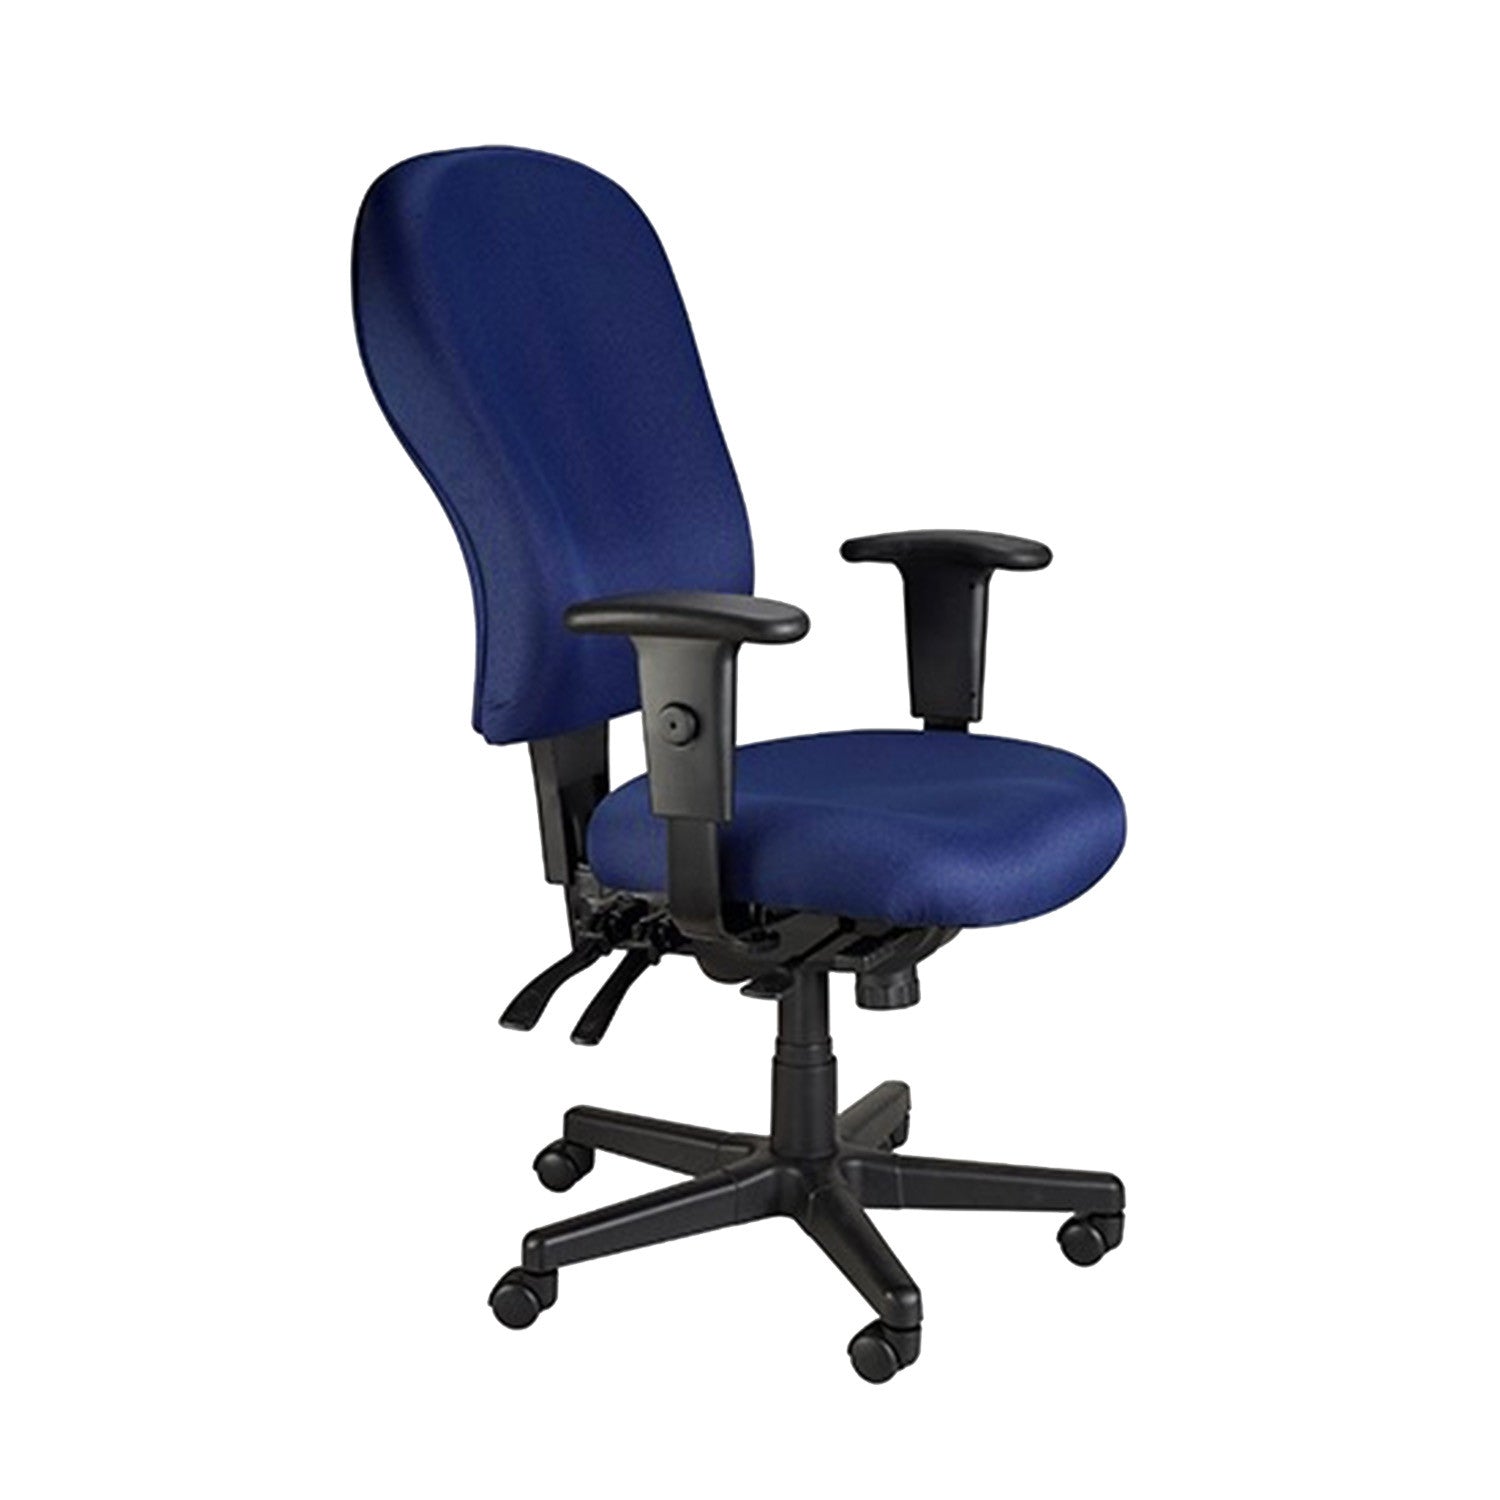 Navy Blue and Black Adjustable Swivel Fabric Rolling Office Chair